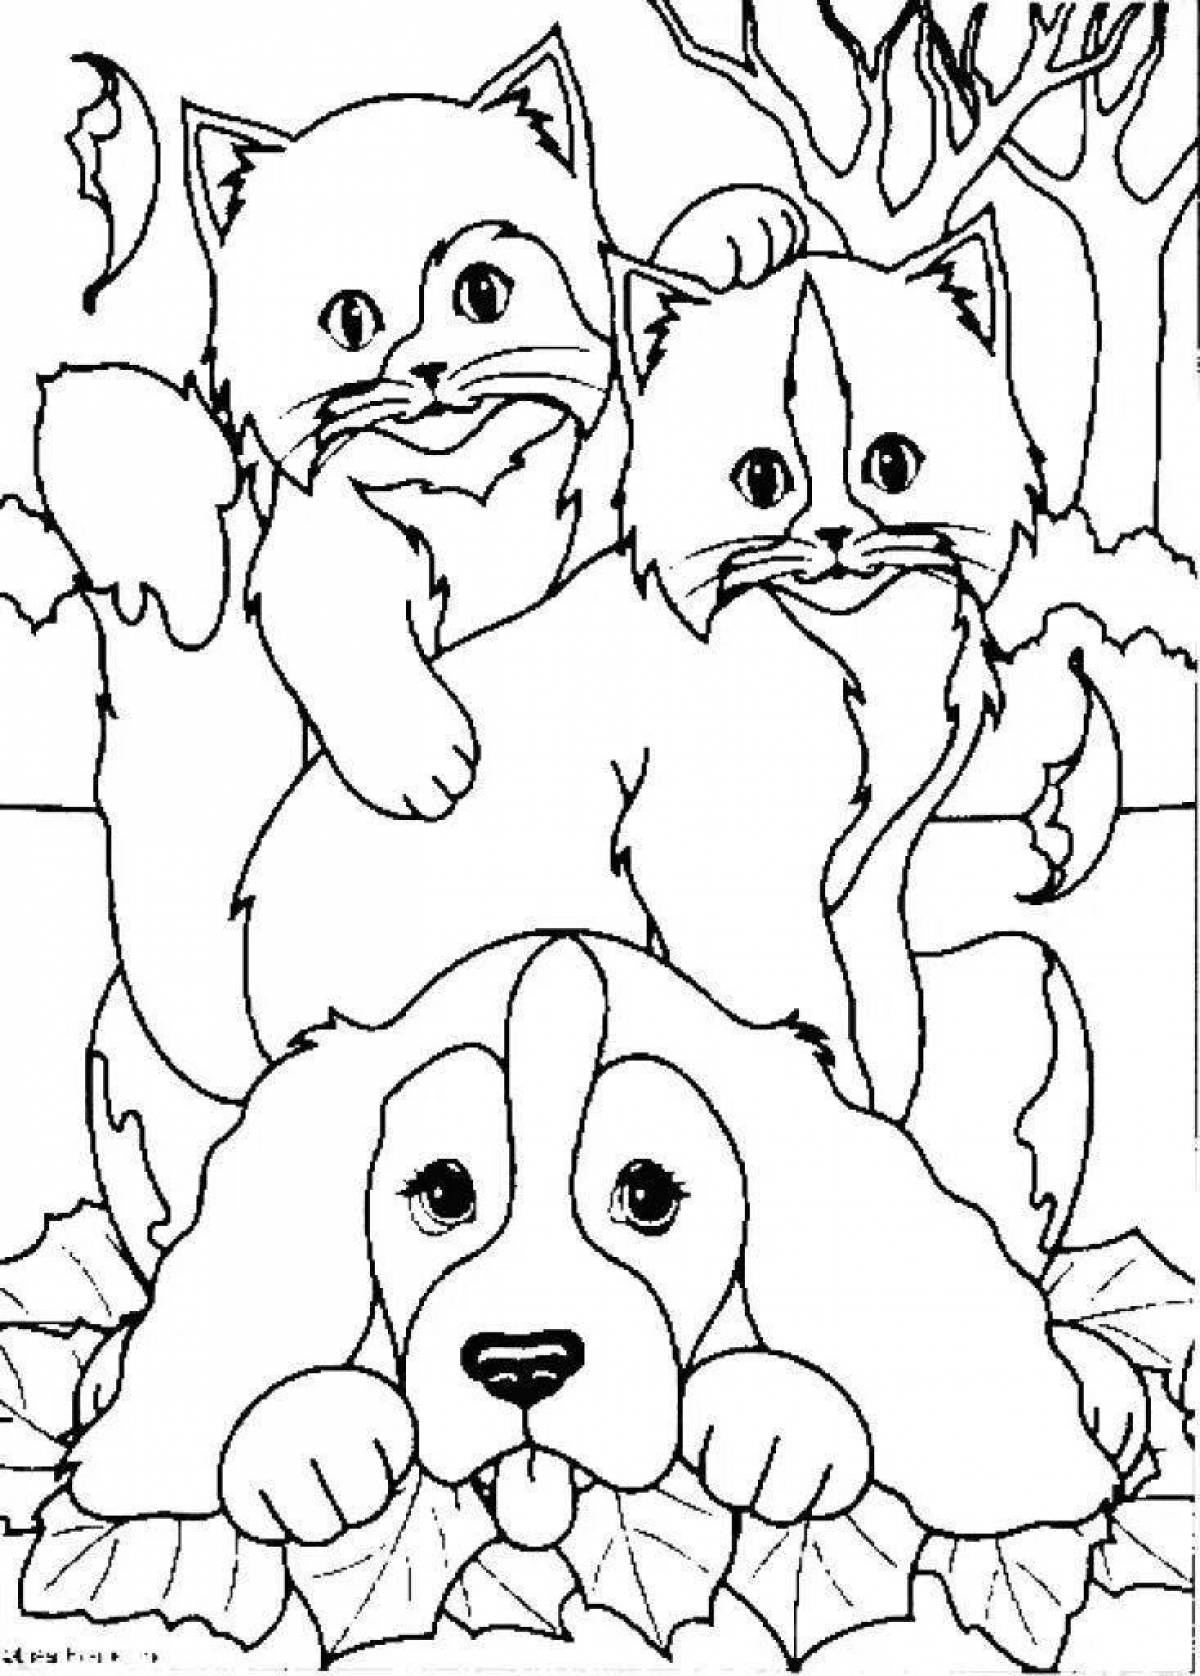 Adorable cat and dog coloring page